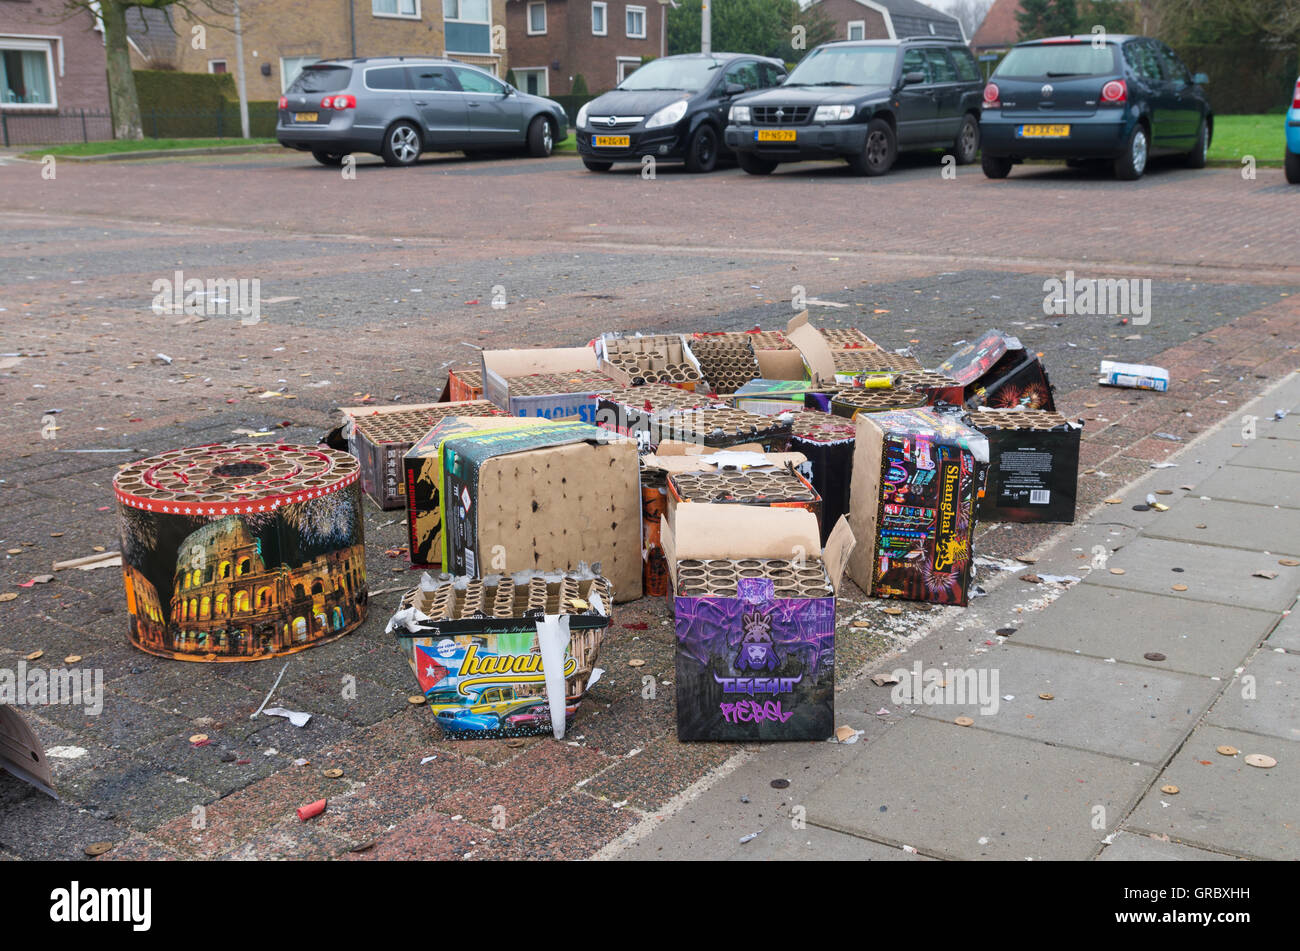 OLDENZAAL, NETHERLANDS - JANUARY 1, 2016: Remnants of fireworks at a waste collection point the day after the traditional new ye Stock Photo